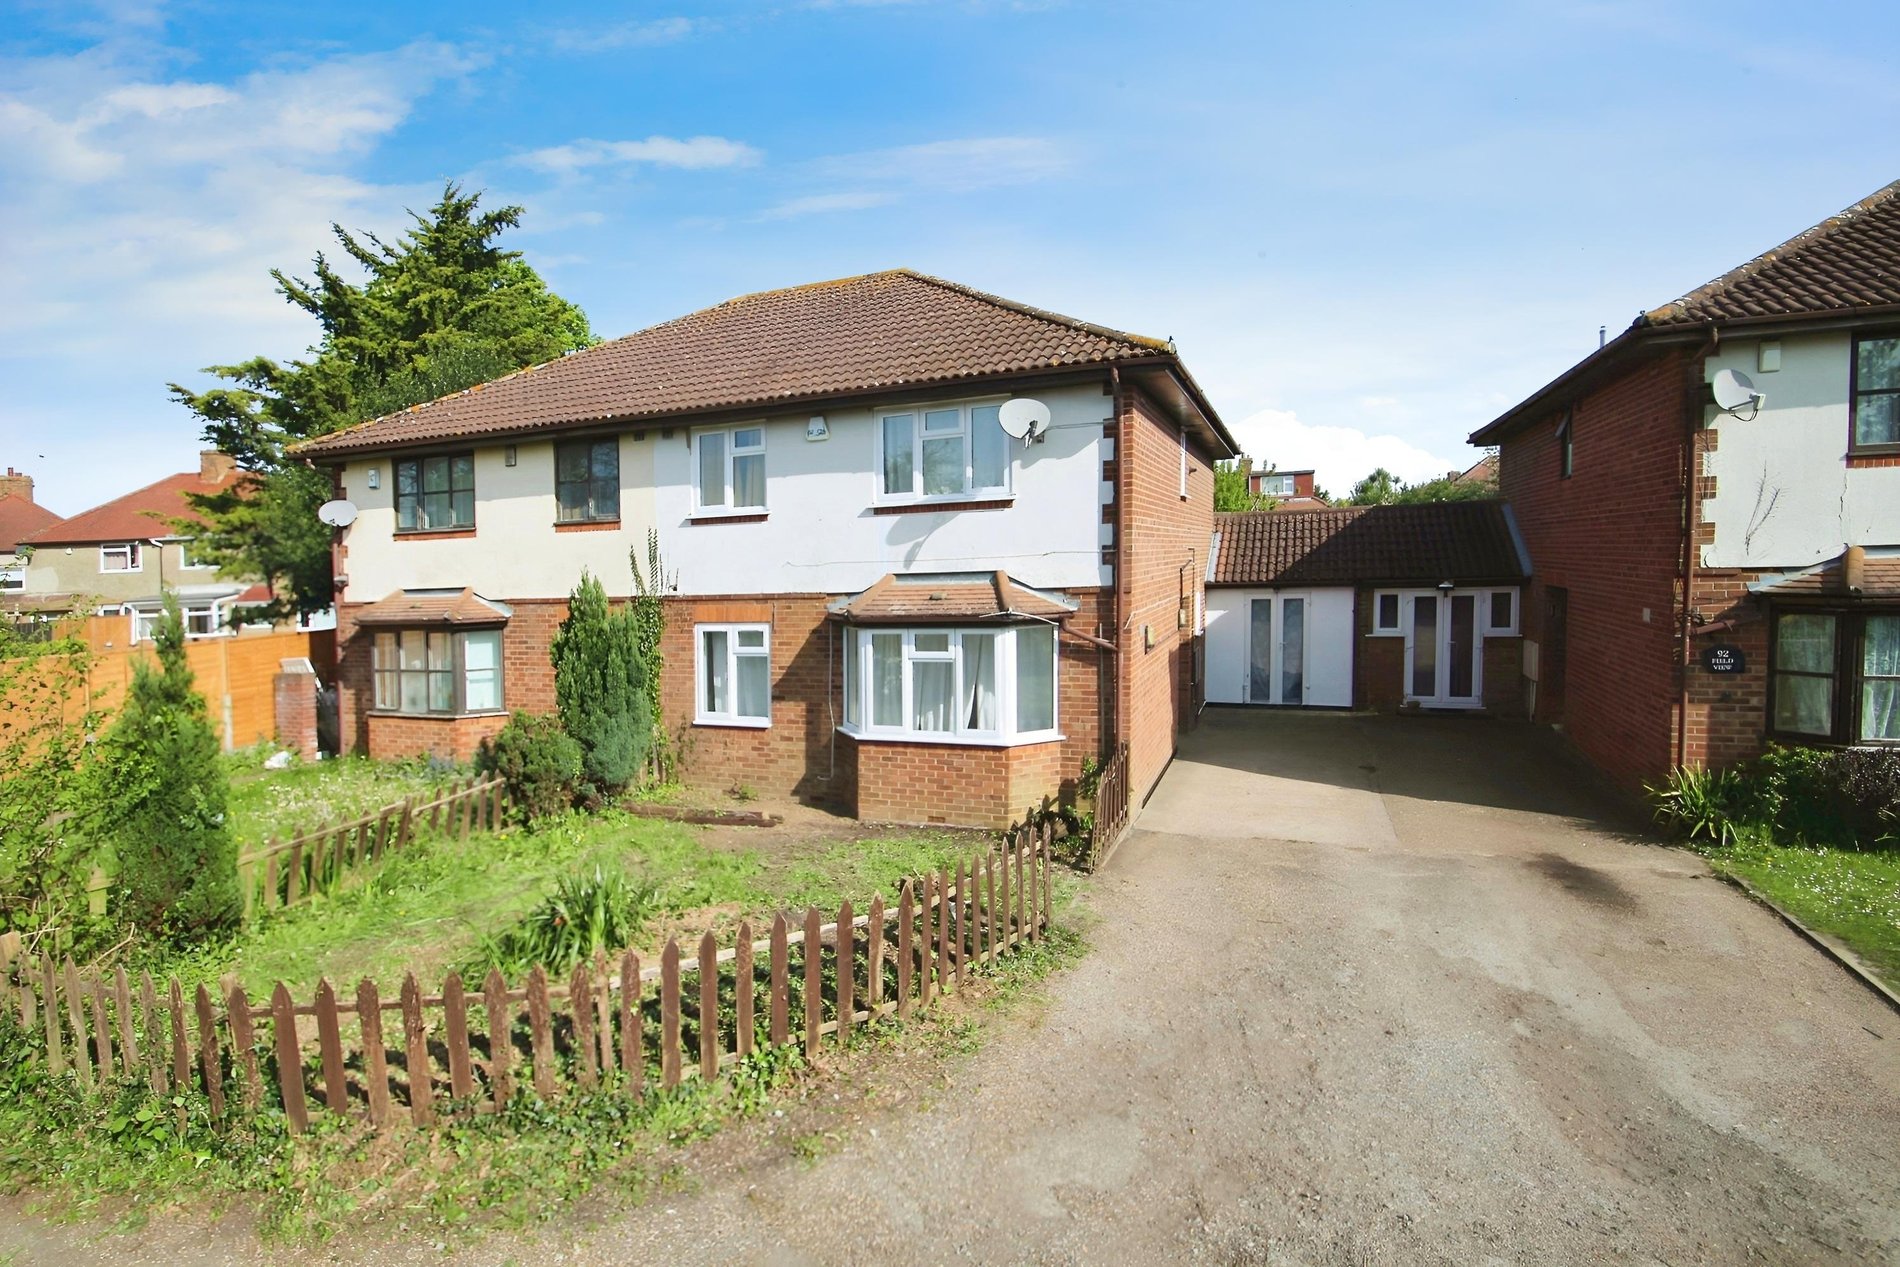 4 bed semi-detached house to rent in Hatch Lane, Harmondsworth  - Property Image 1